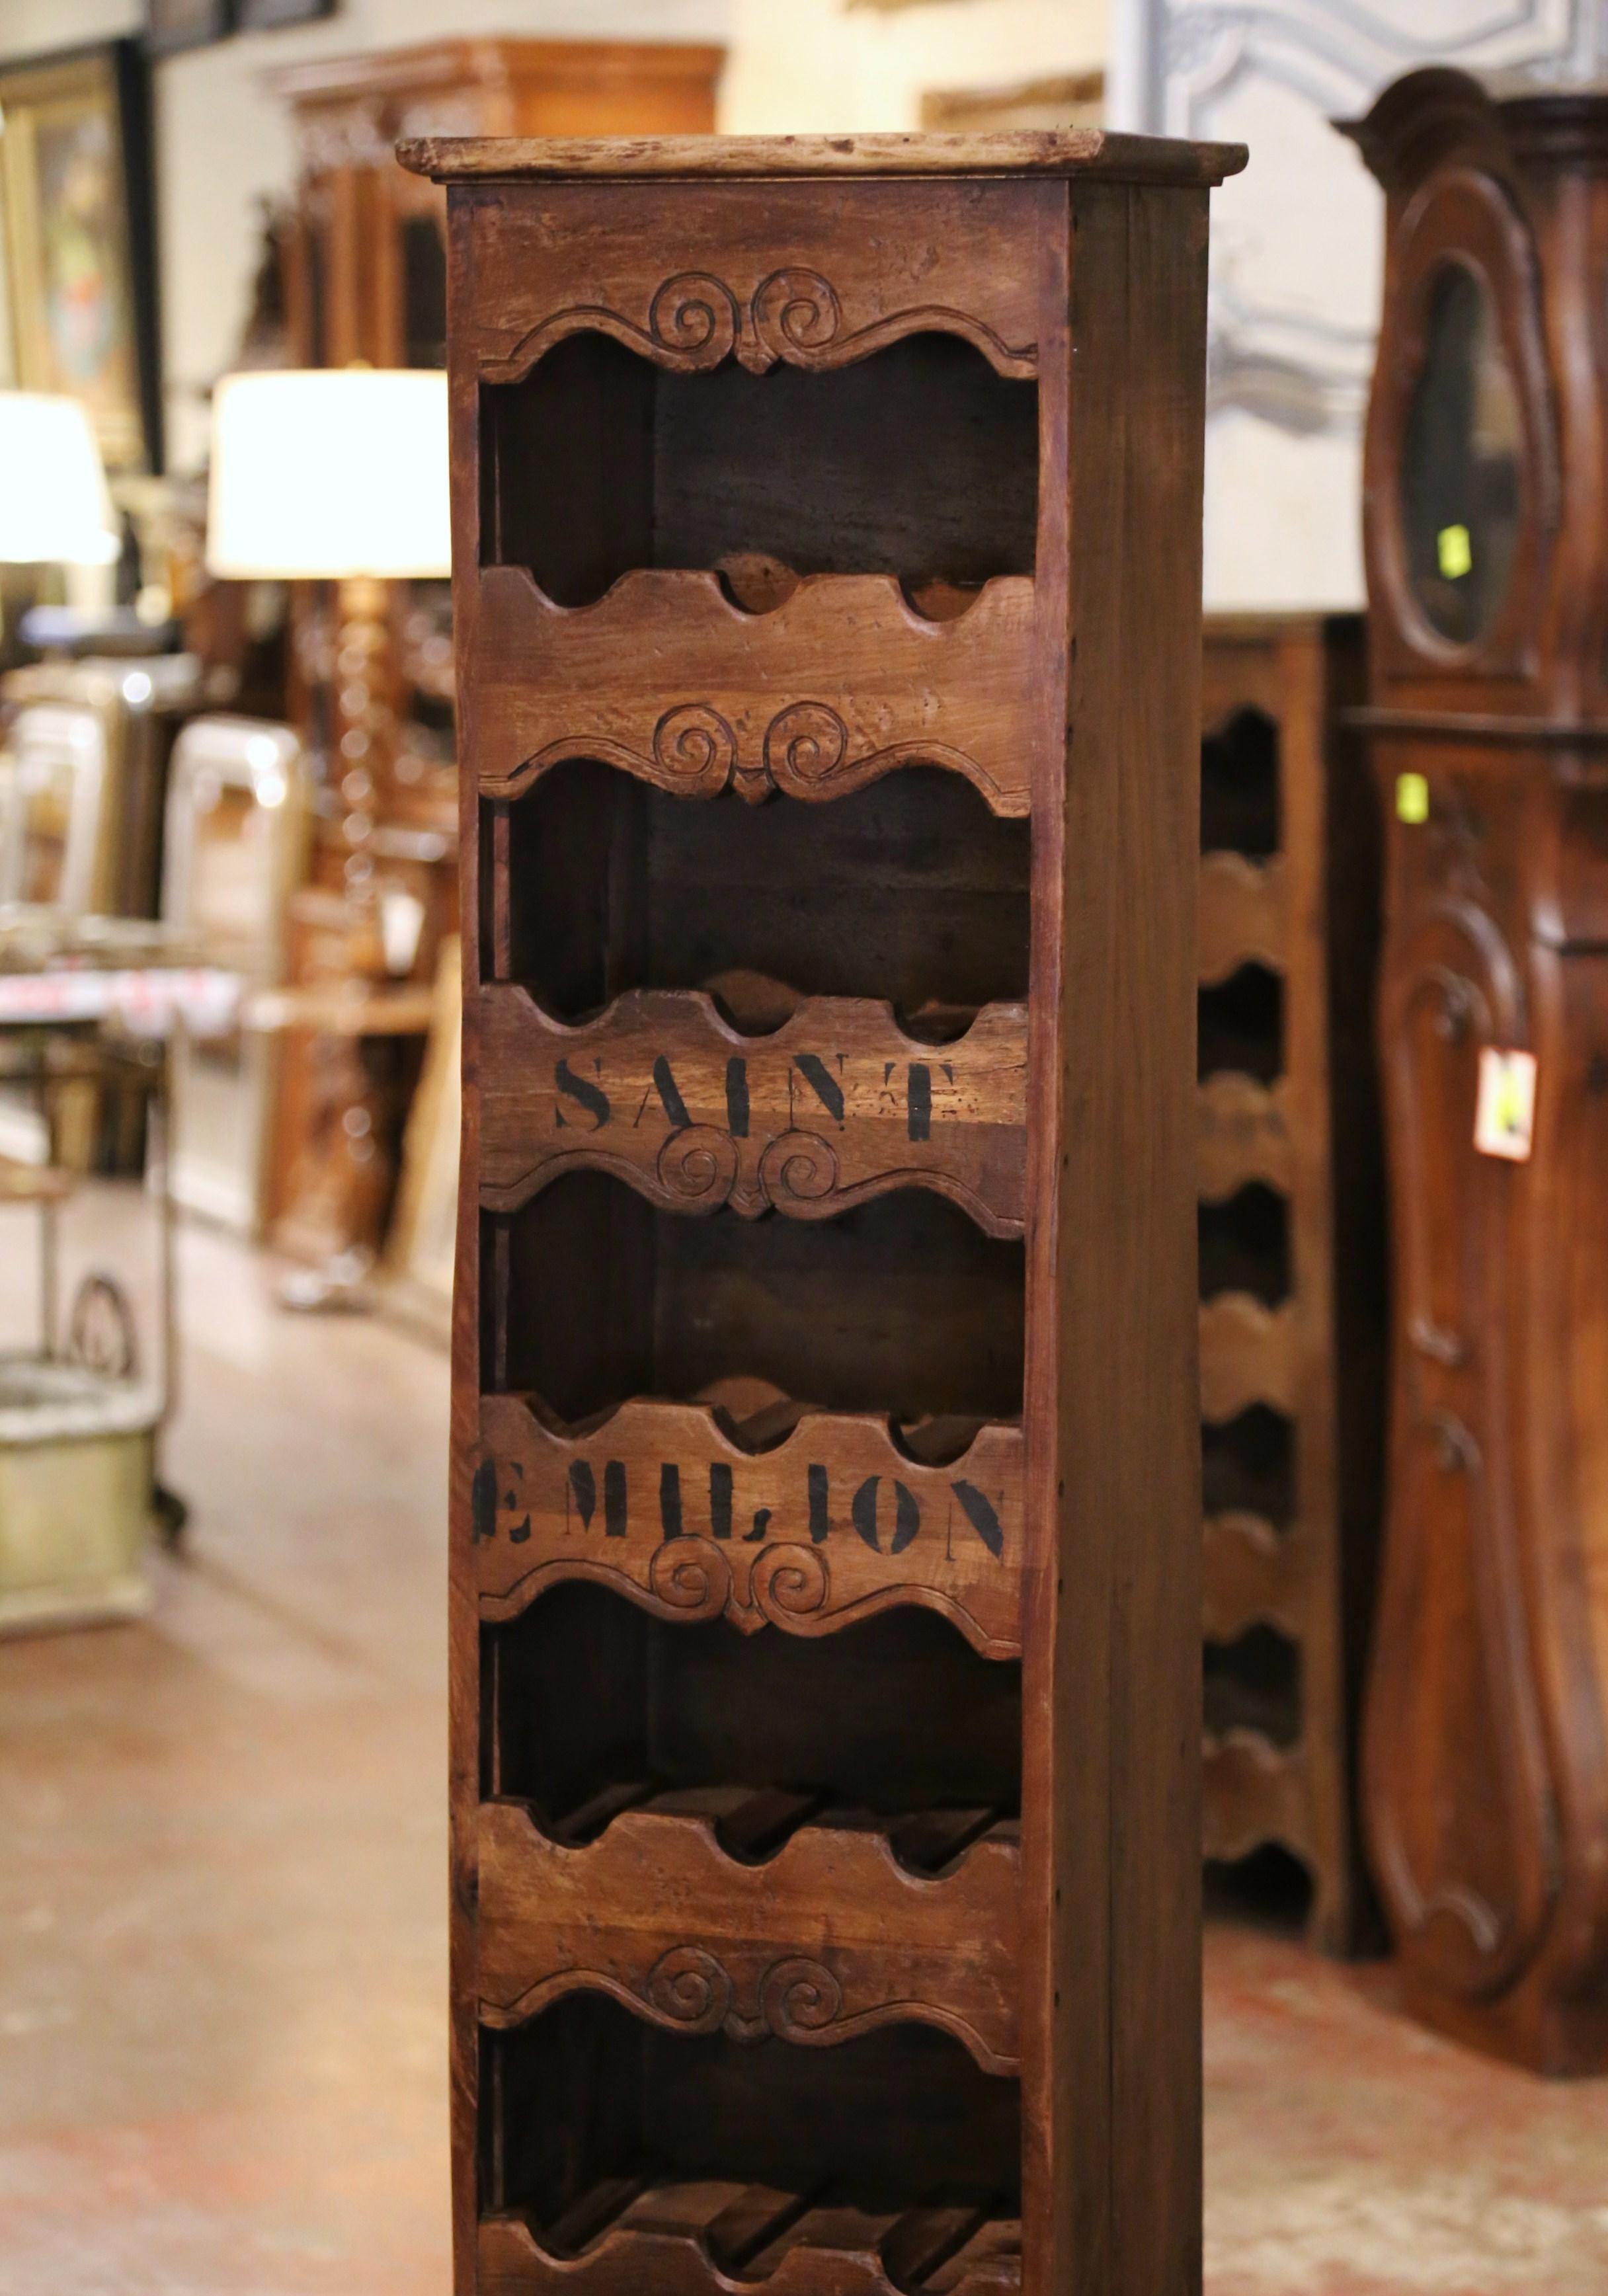 This narrow, antique wine storage cabinet was crafted in western France using old timber. Built of pine wood, the tall and thin cabinet sits on four small scroll feet under a scalloped apron. The piece features seven shelves embellished with